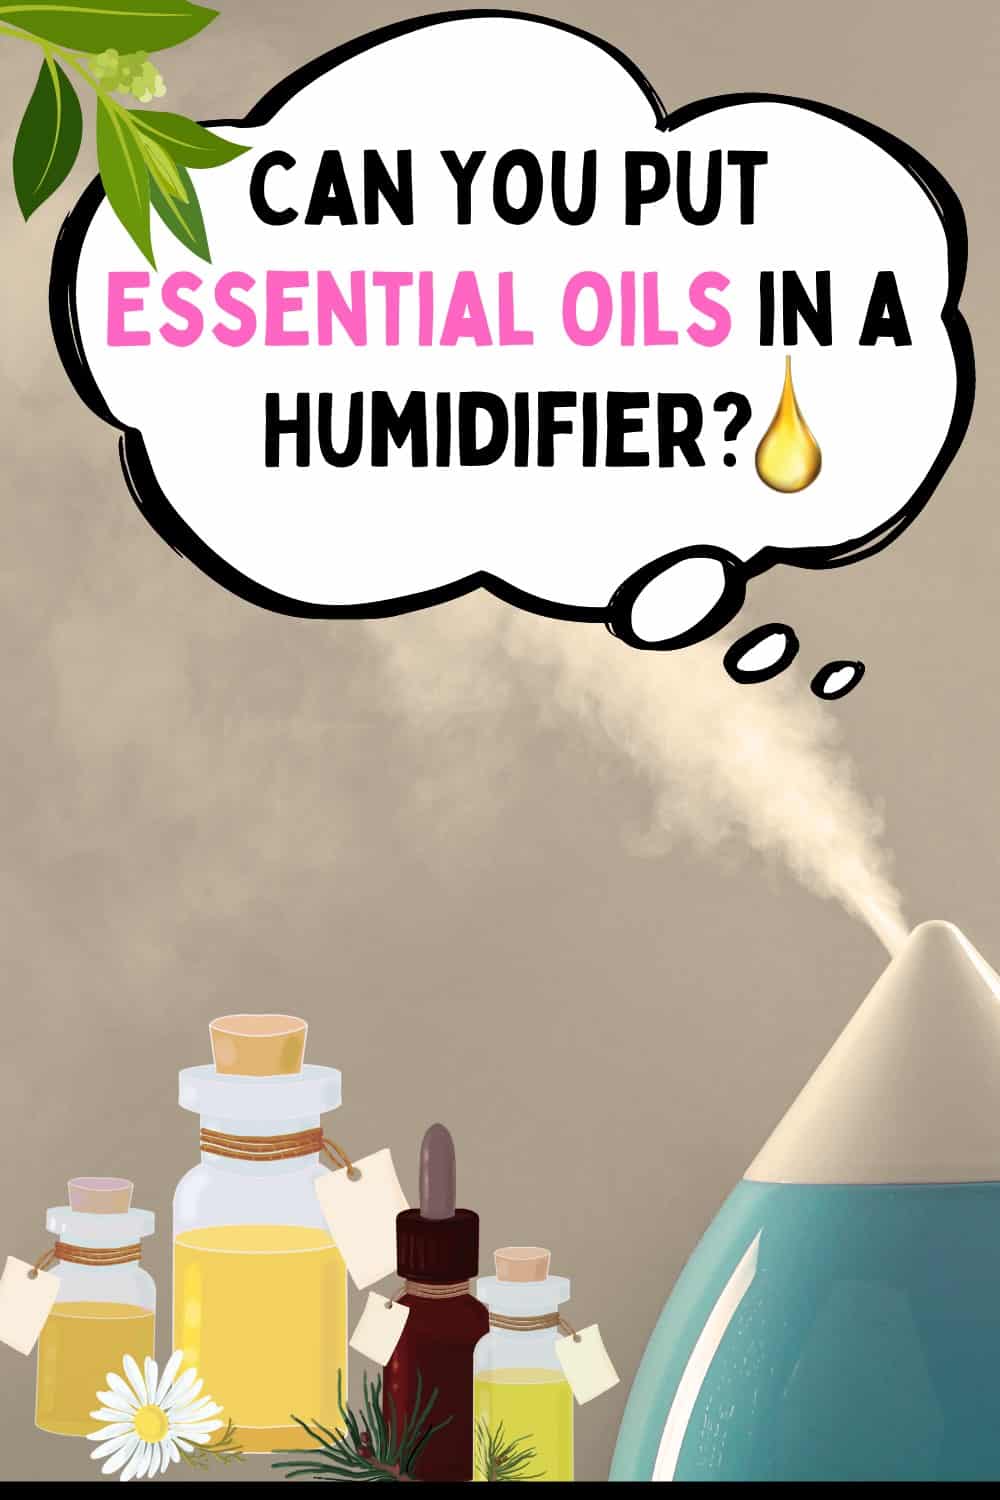 No You should not put essential oils in a humidifier